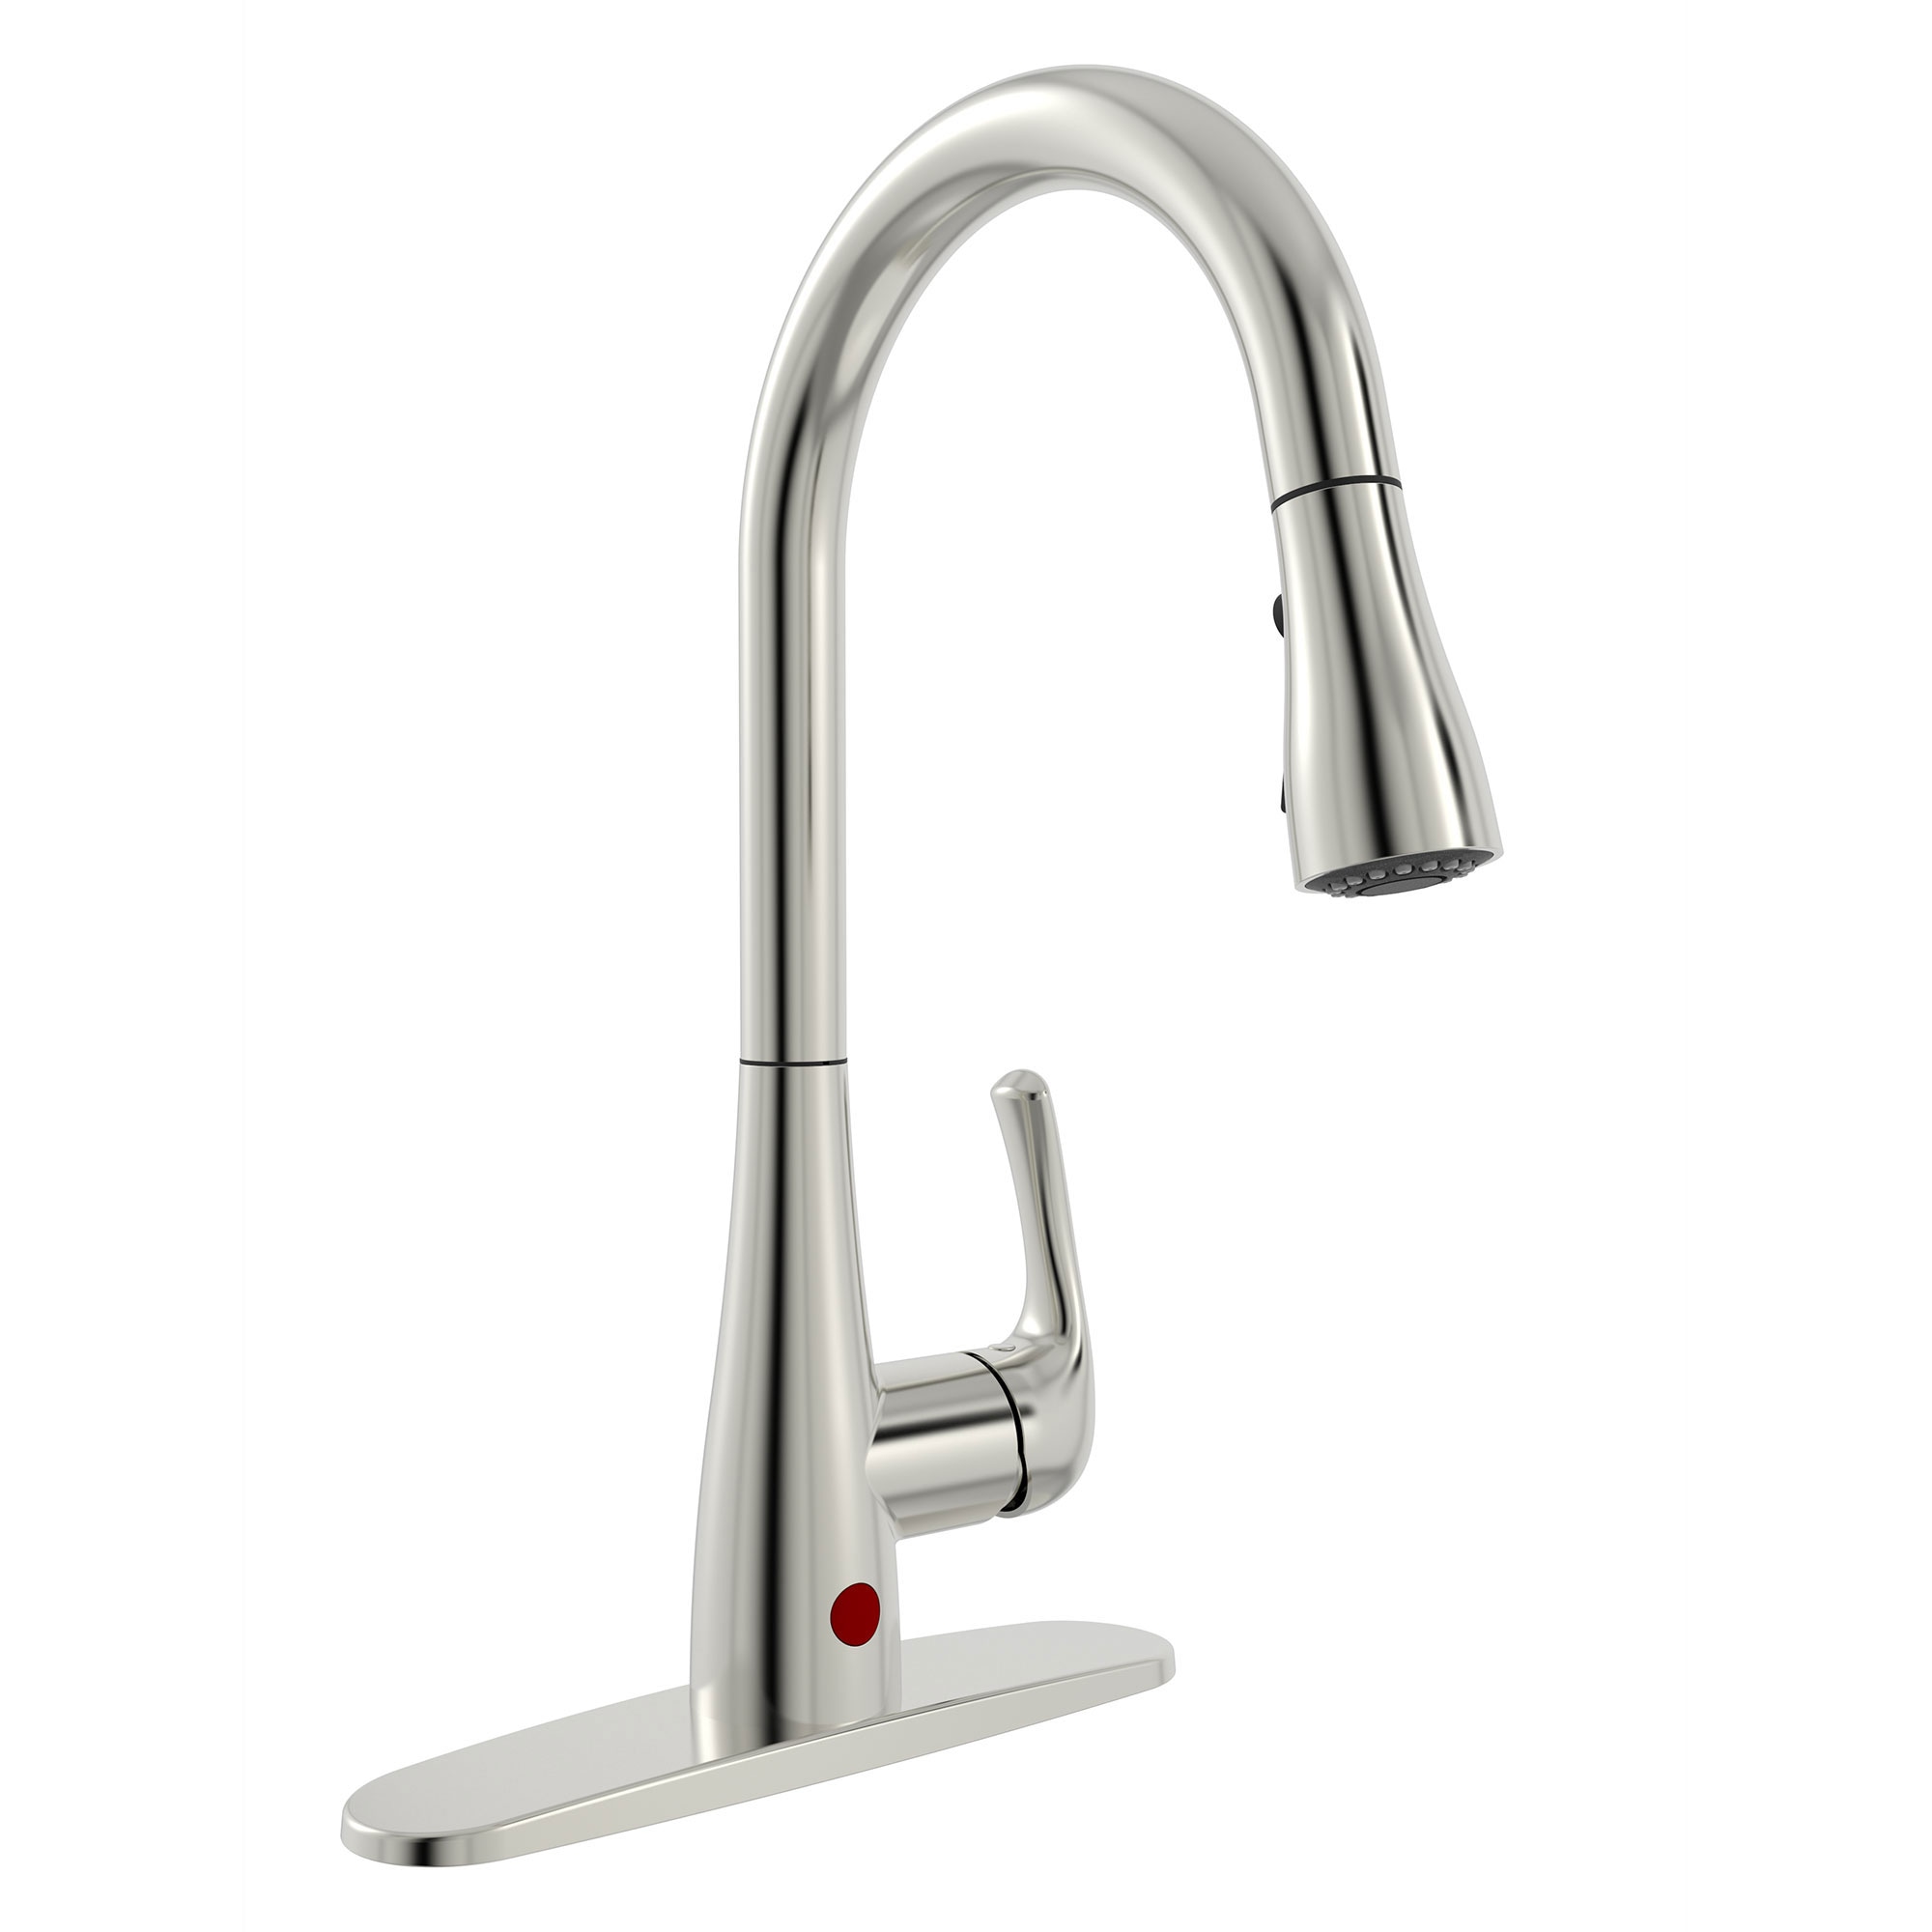 Belanger Nexo Brushed Nickel Single Handle Deck mount Pull down Touchless  Kitchen Faucet Deck Plate Included